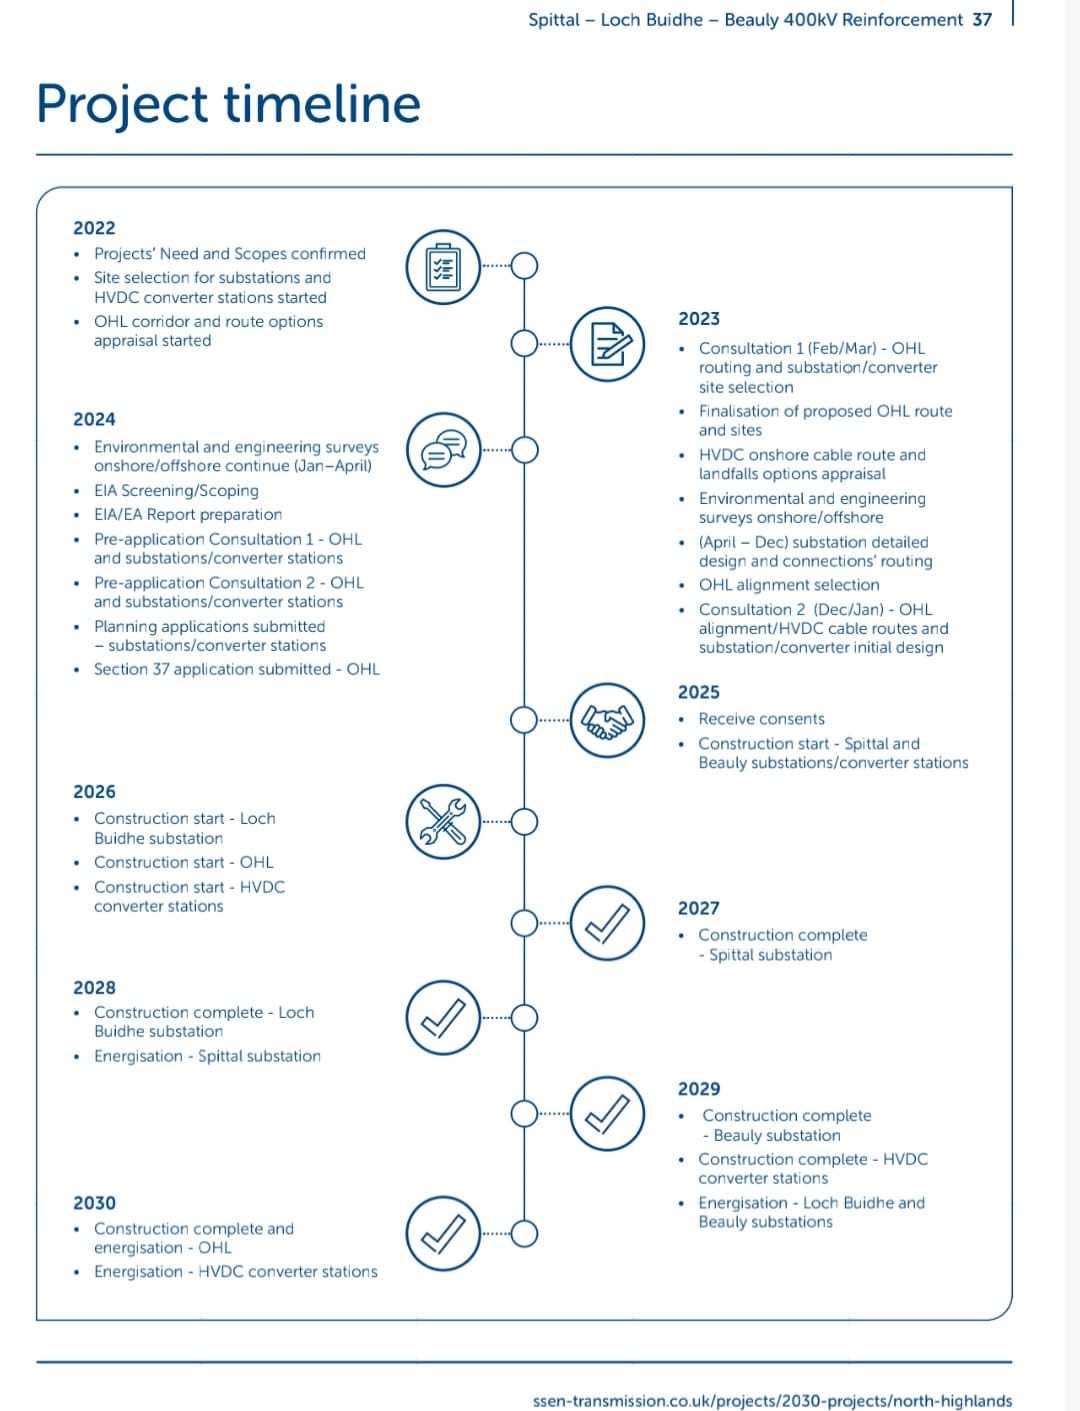 The SSEN full project timeline